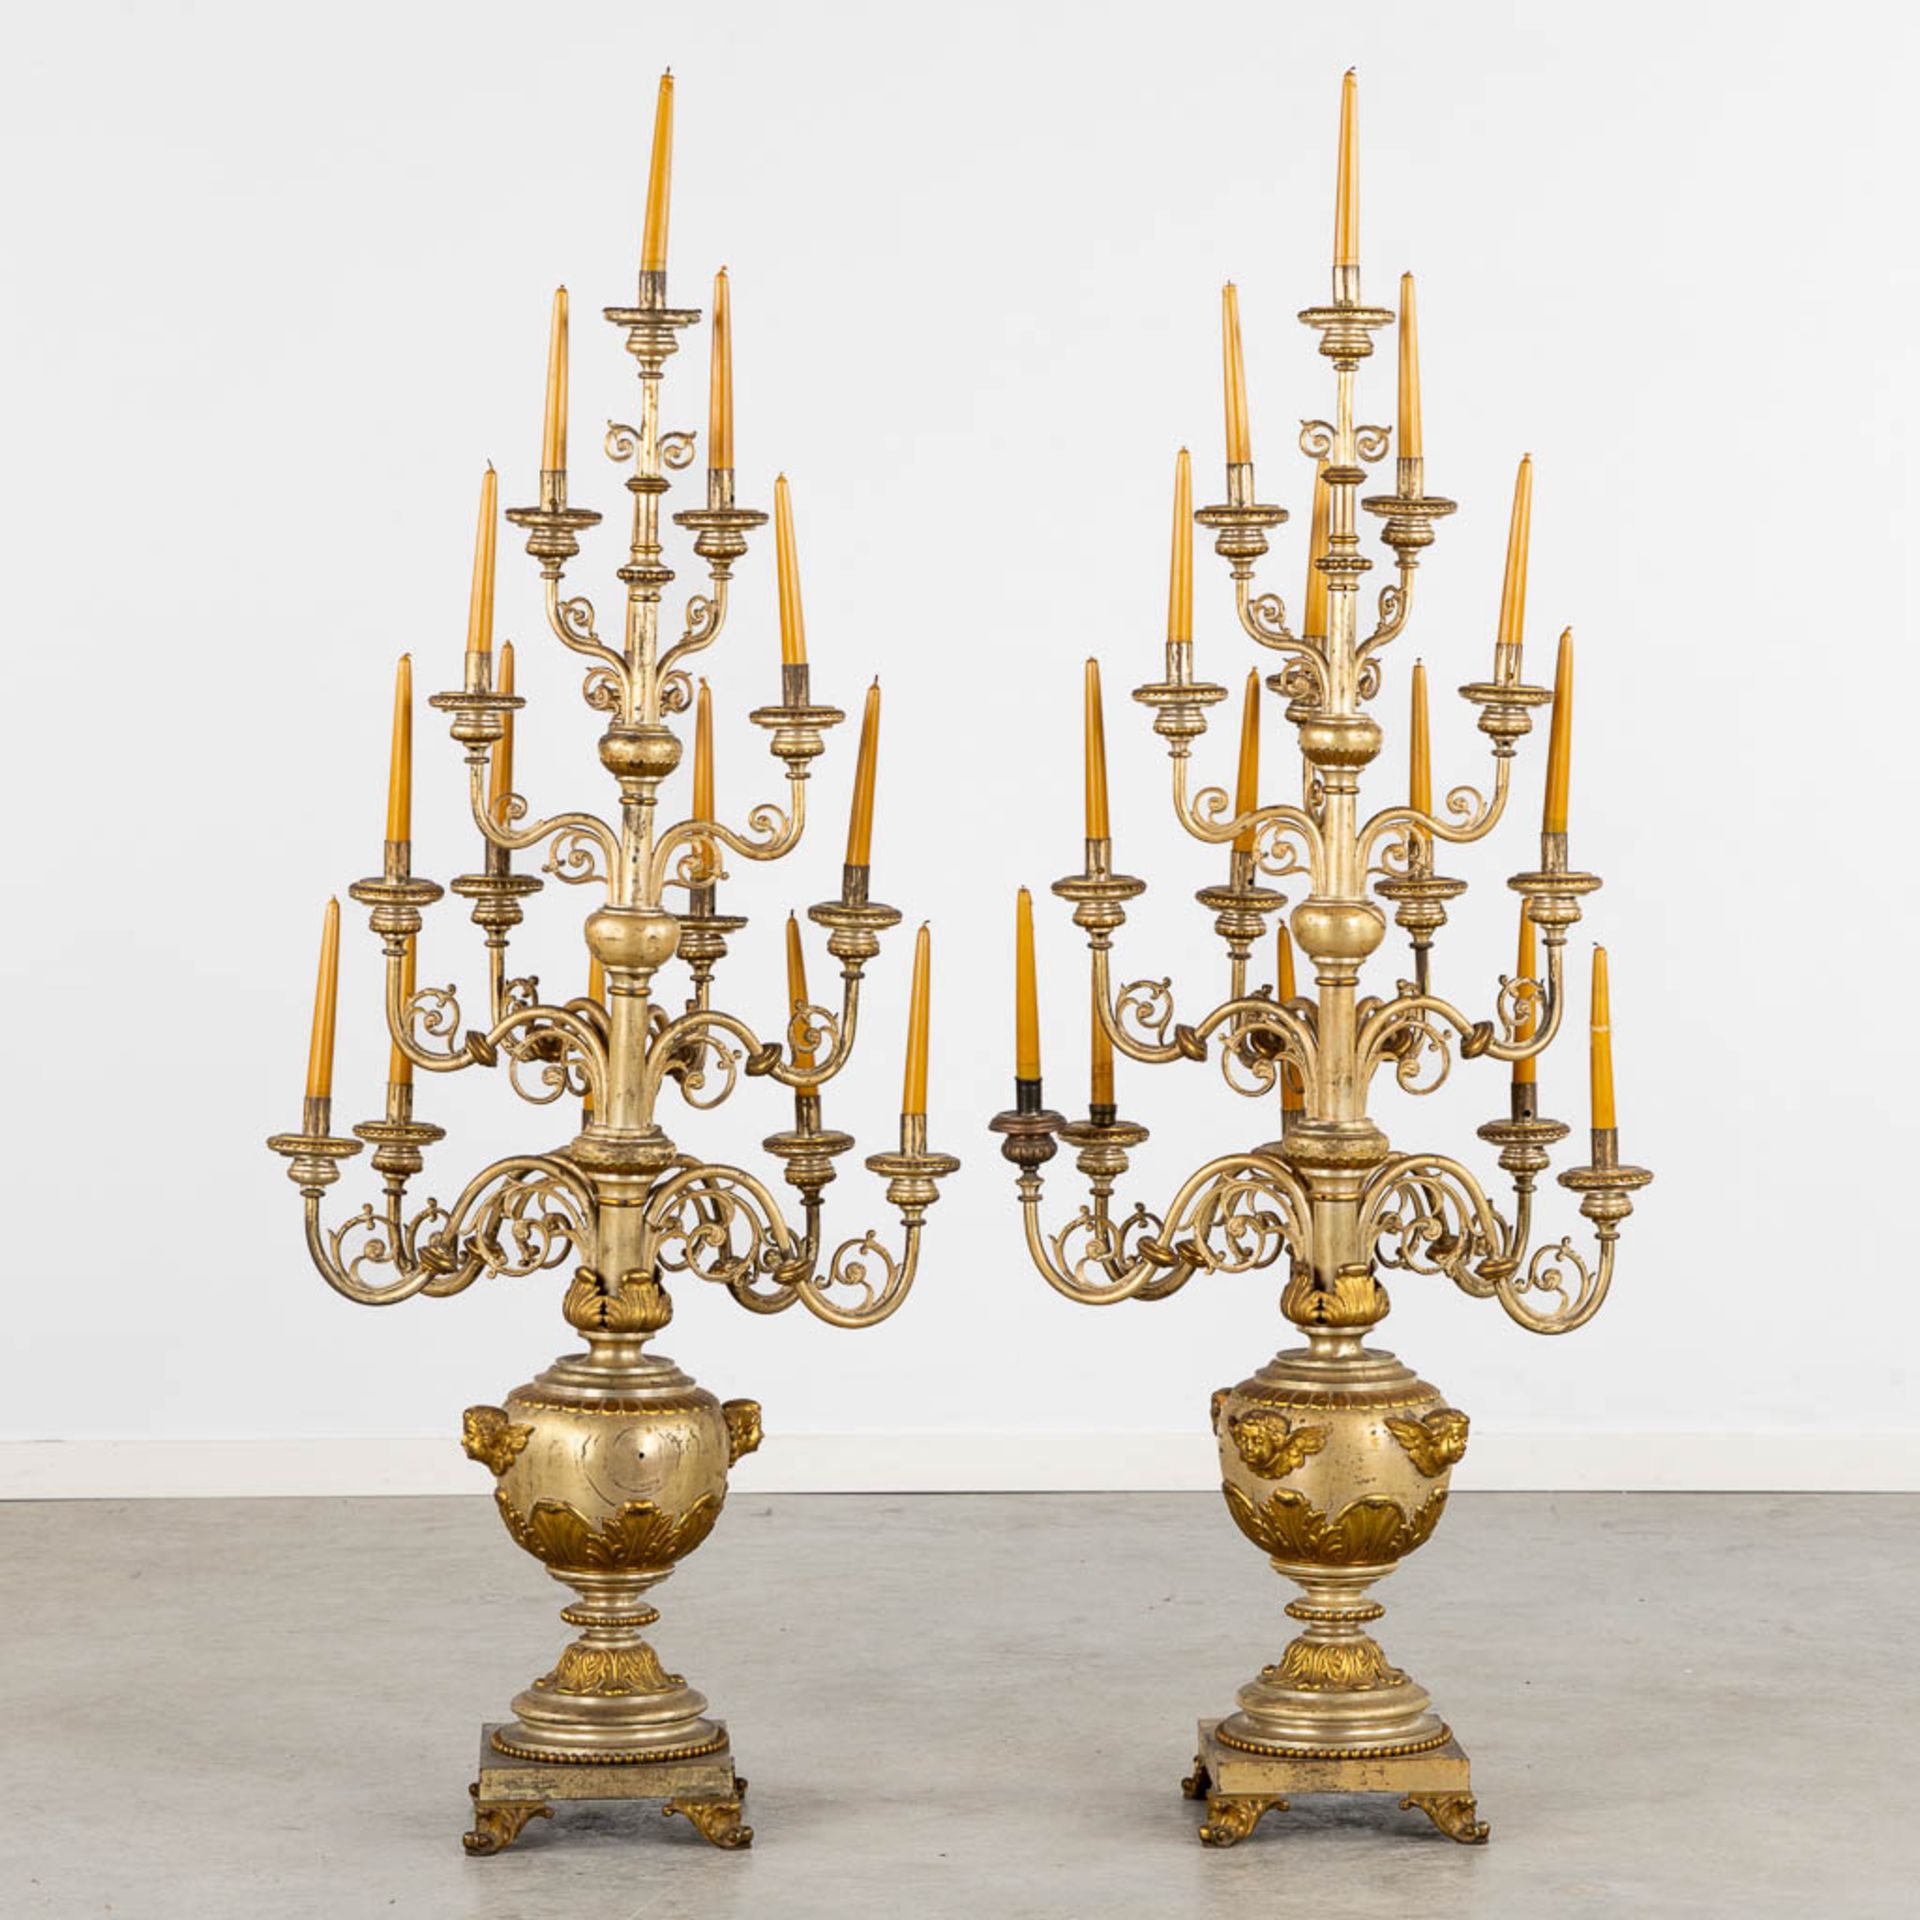 An impressive pair of candelabra, 15 candles, gold and silver-plated metal. (L:44 x W:60 x H:138 cm) - Bild 5 aus 12